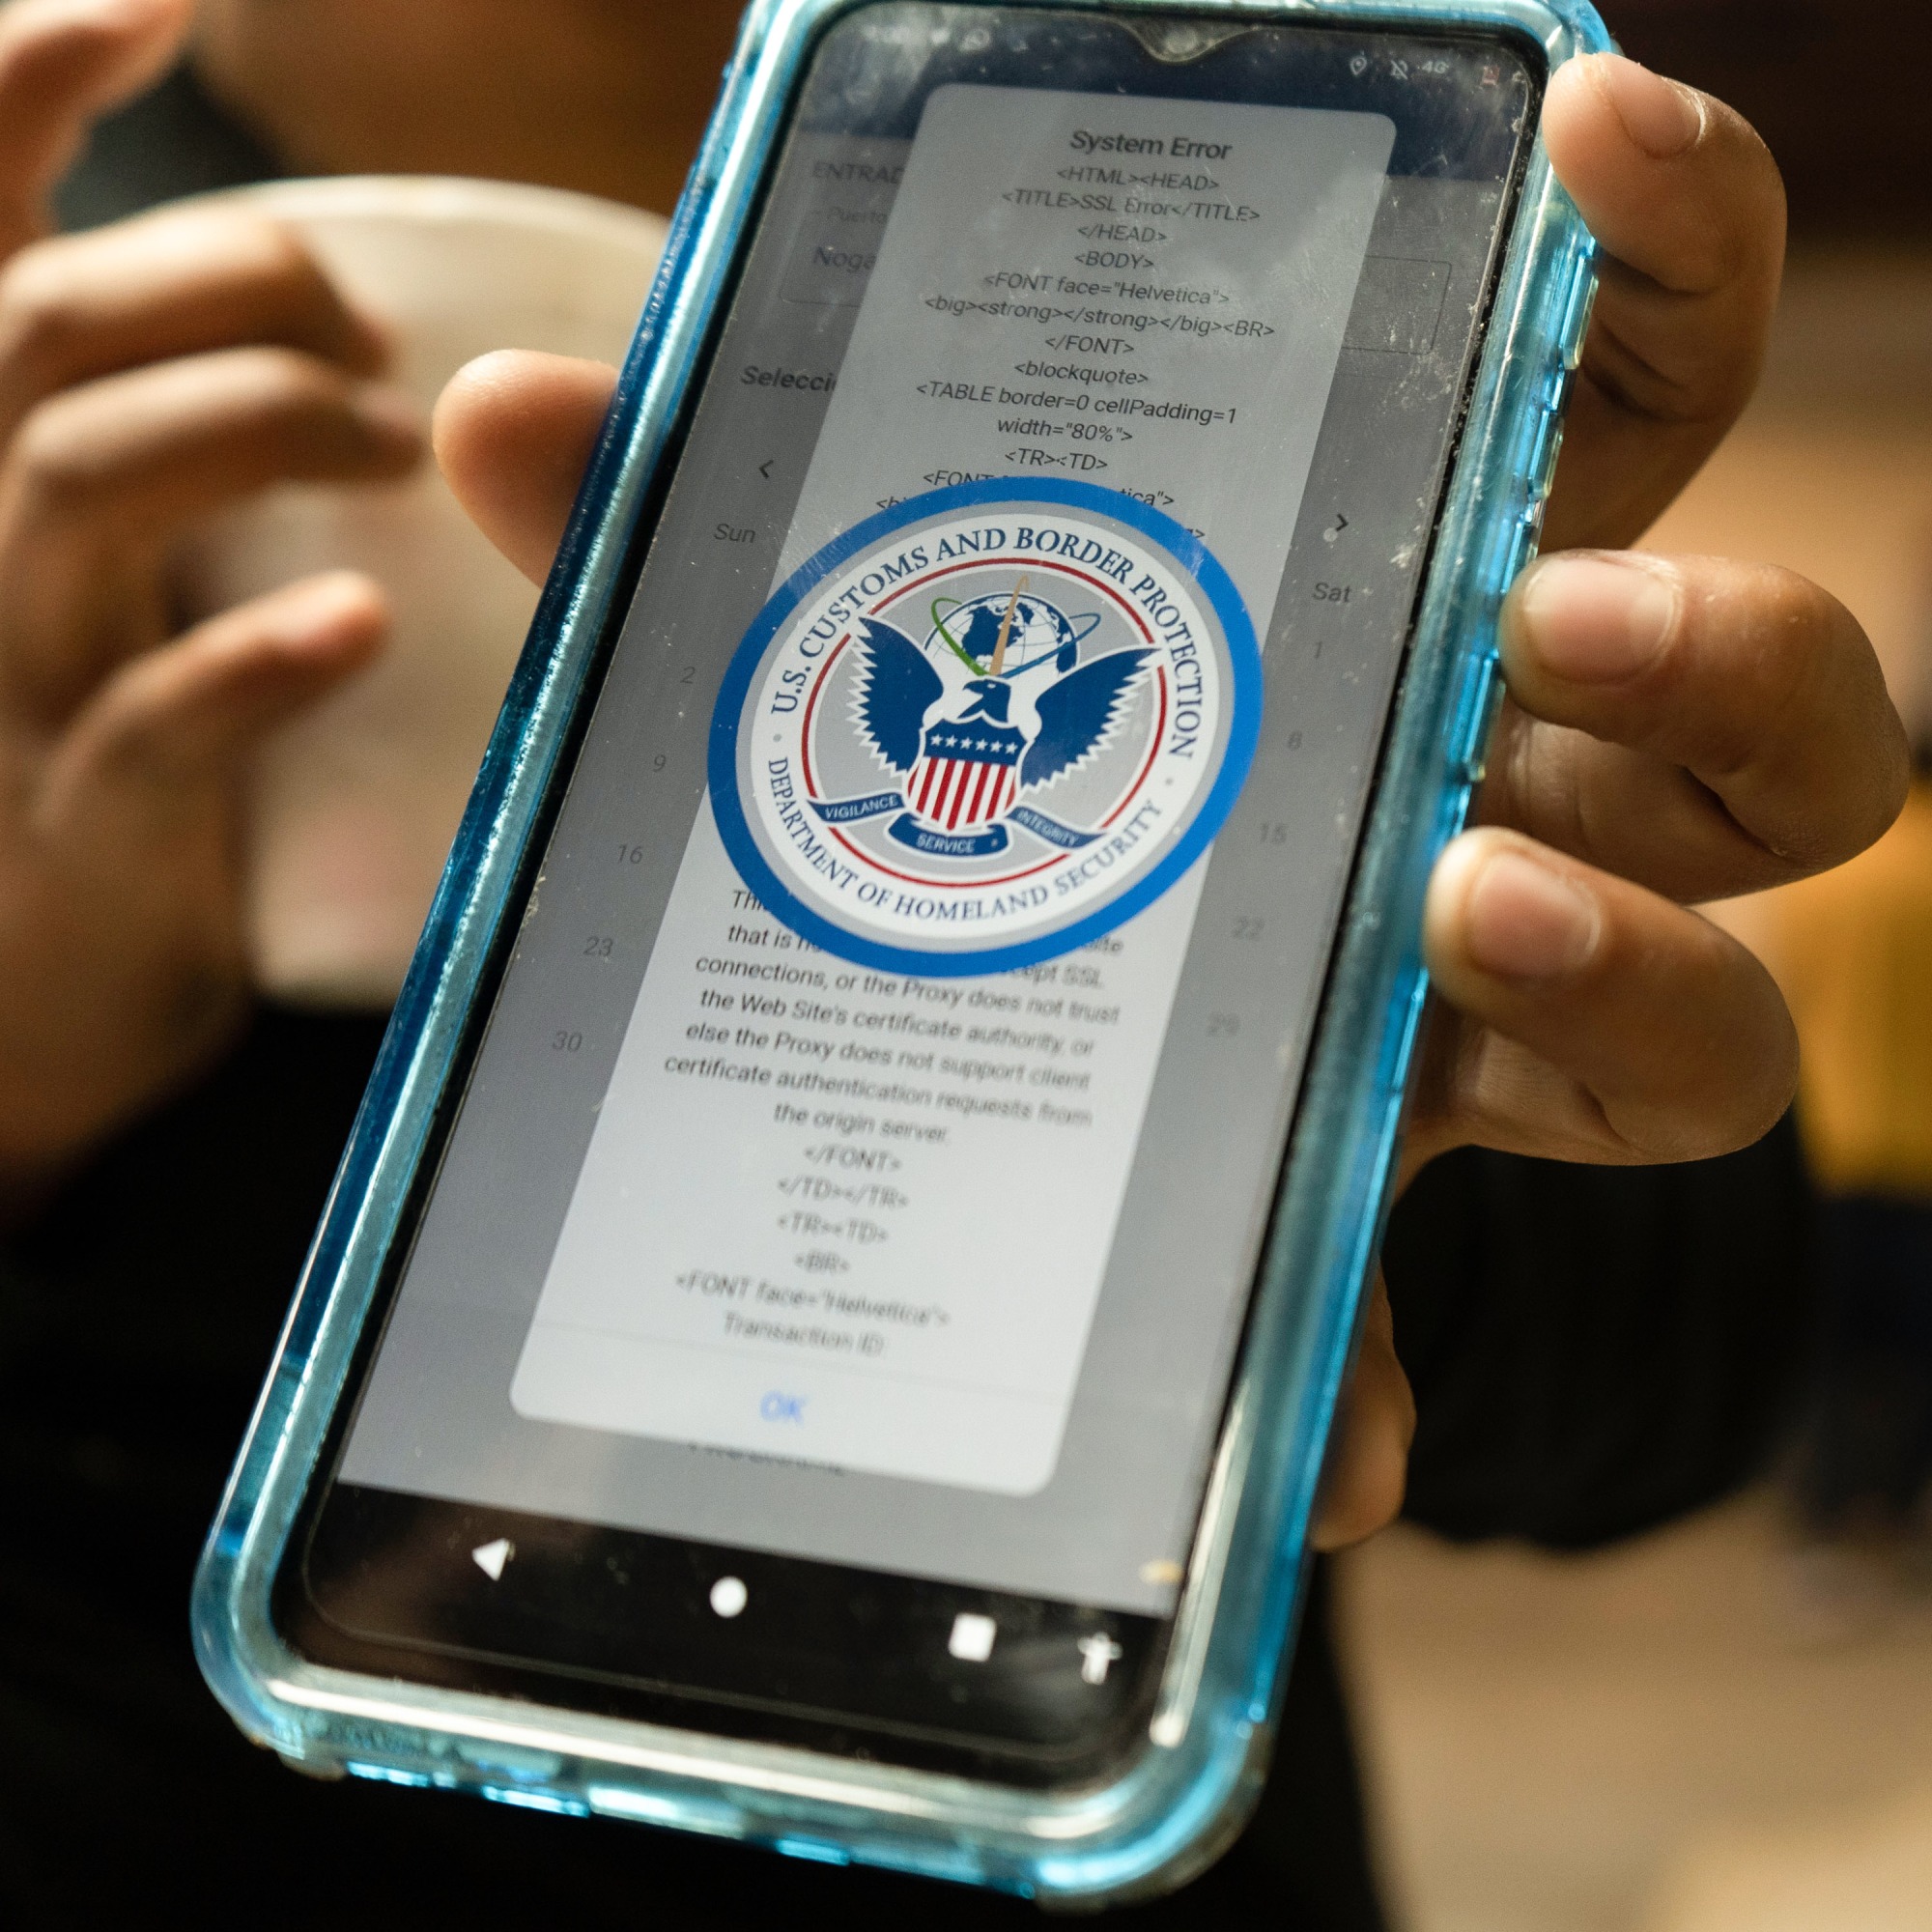 close up of a phone with the US Customs and Border Protection logo visible on the screen over a system error code